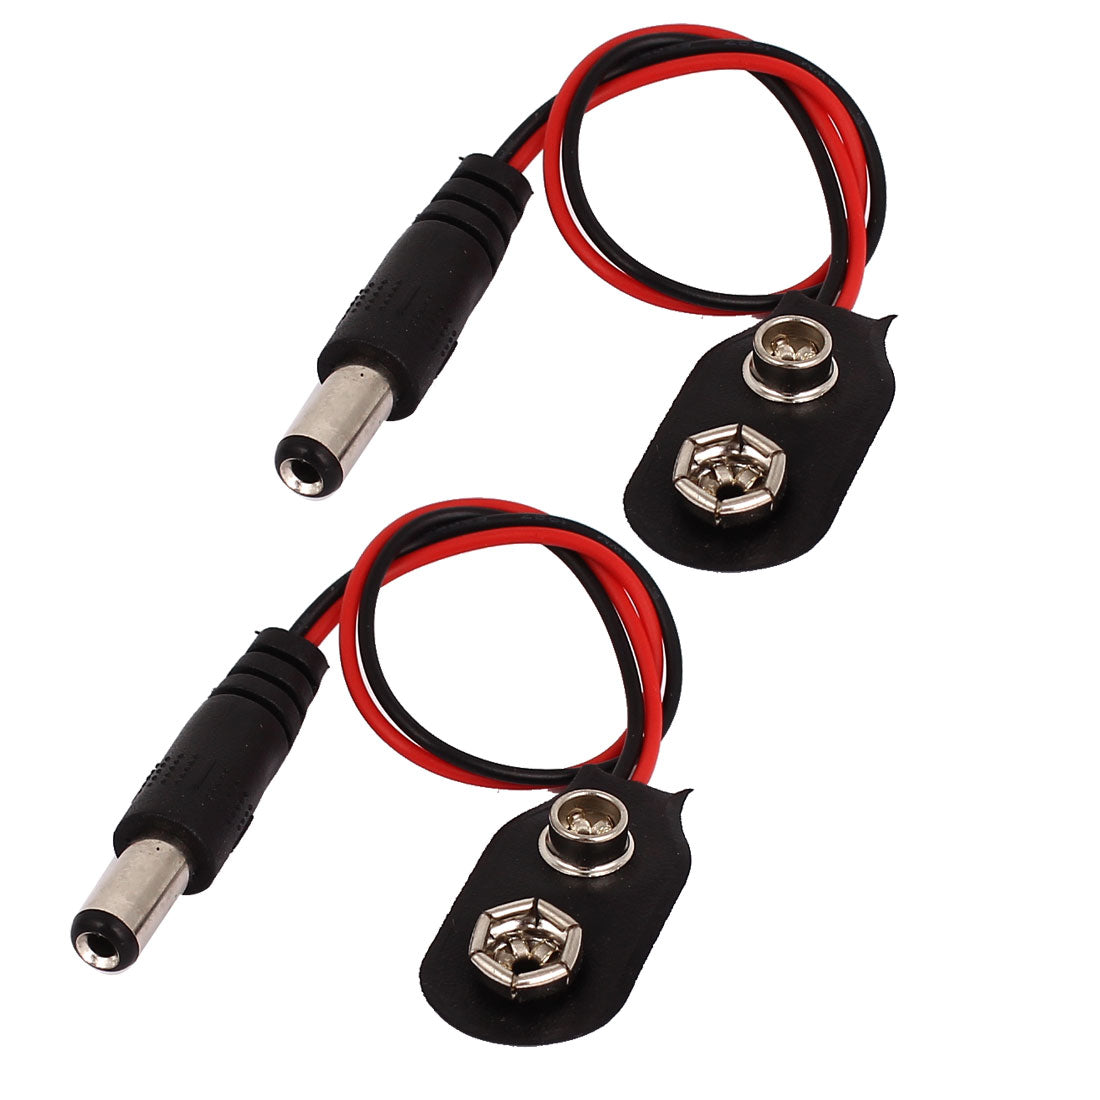 uxcell Uxcell 2Pcs 5.5x2.1mm DC Male Connector 9V Battery Buckle Clip Connector Holder Cable 19cm